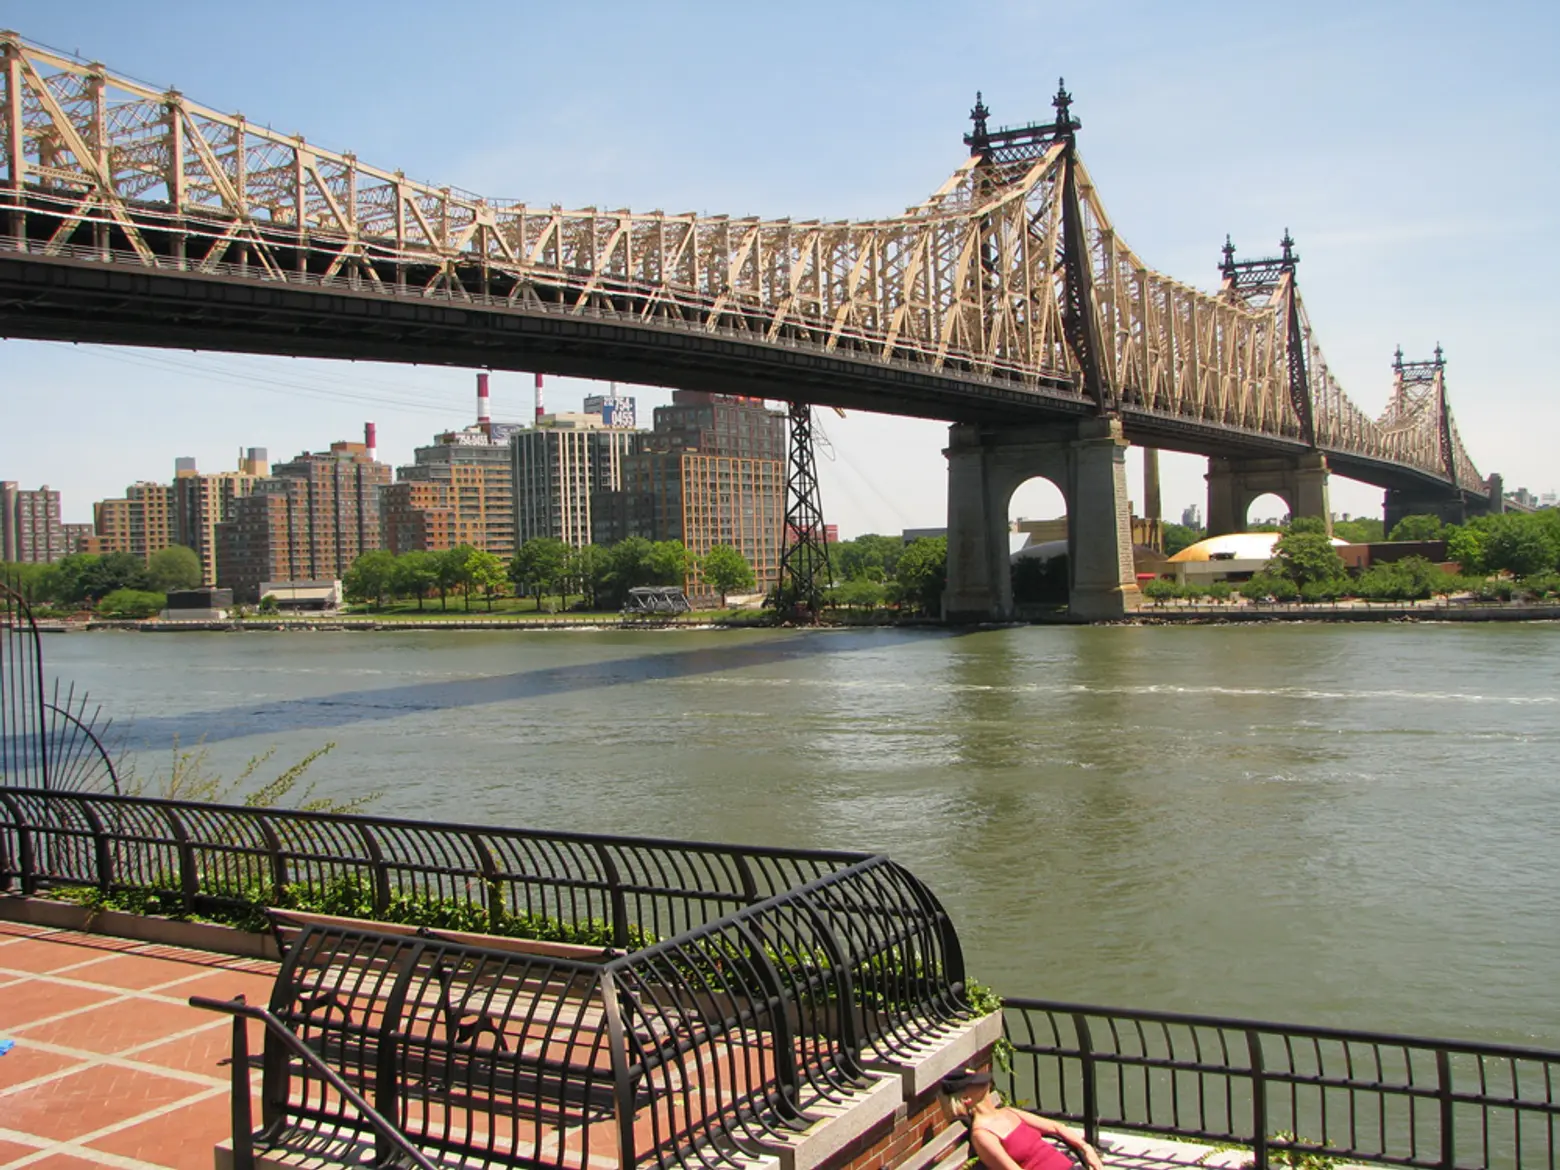 East River bridges to get $392 million from city to fund repairs